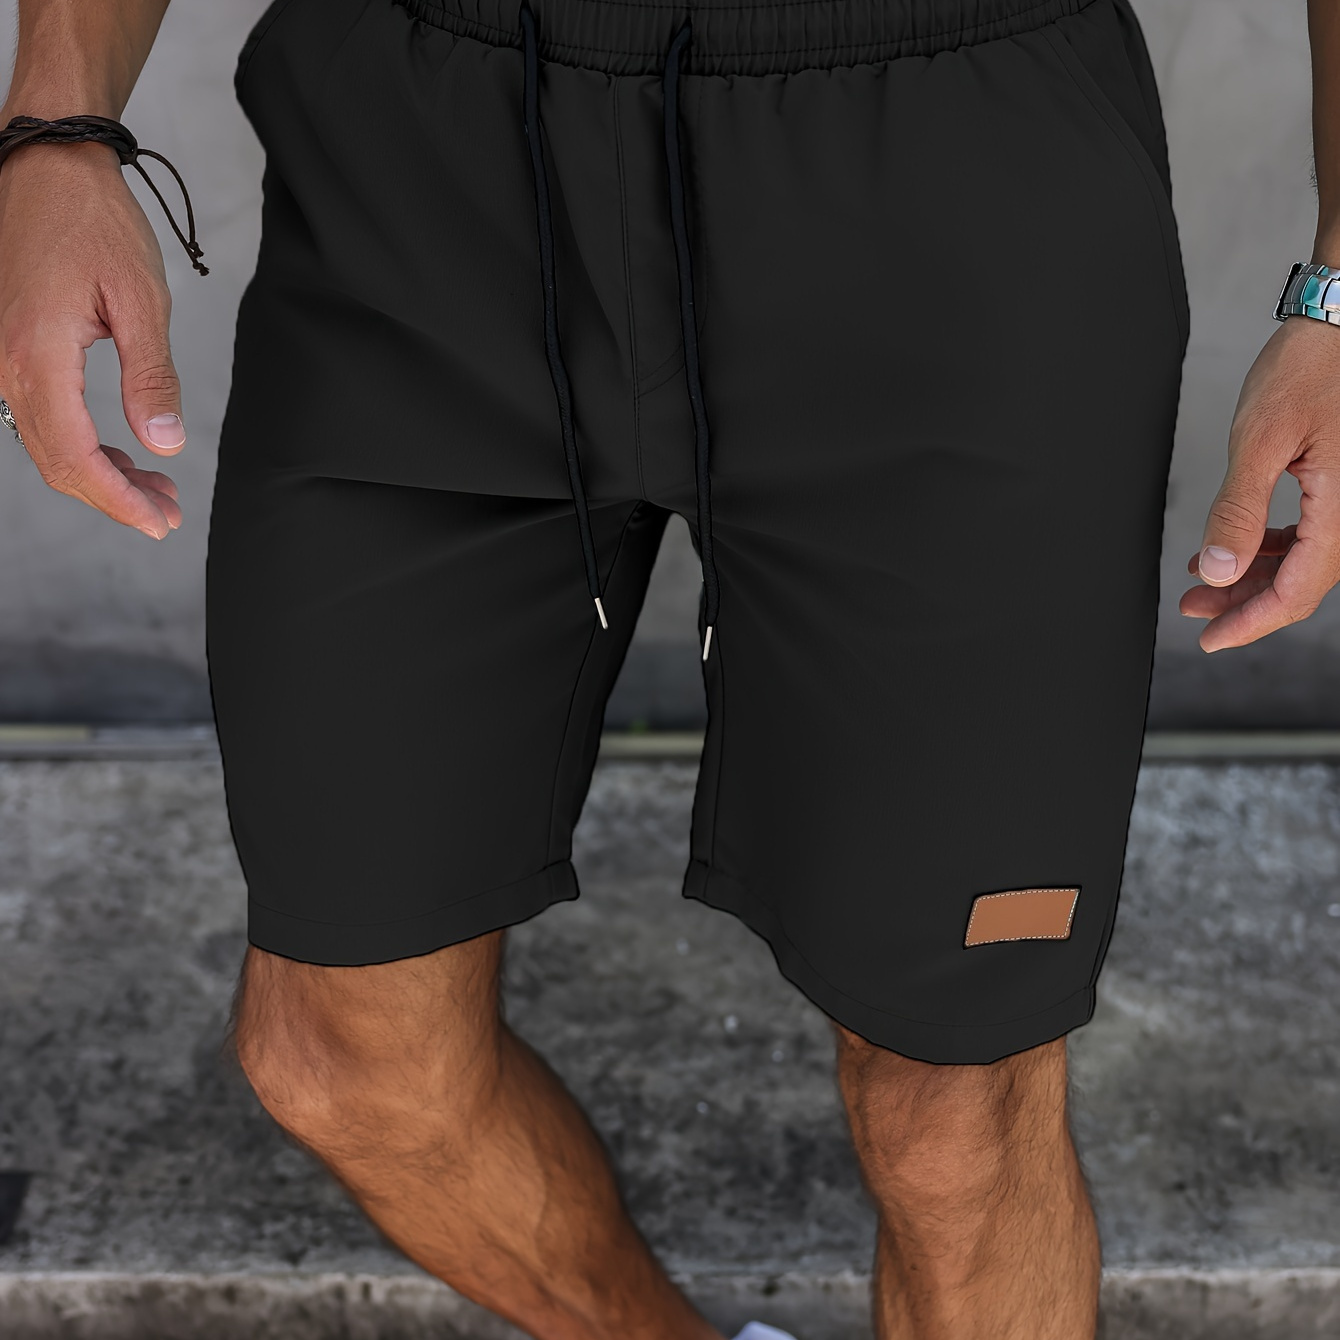 

Men's Summer Solid Drawstring Sports Shorts, Breathable Fabric Knee-length Shorts, Casual Beachwear, Athletic Style